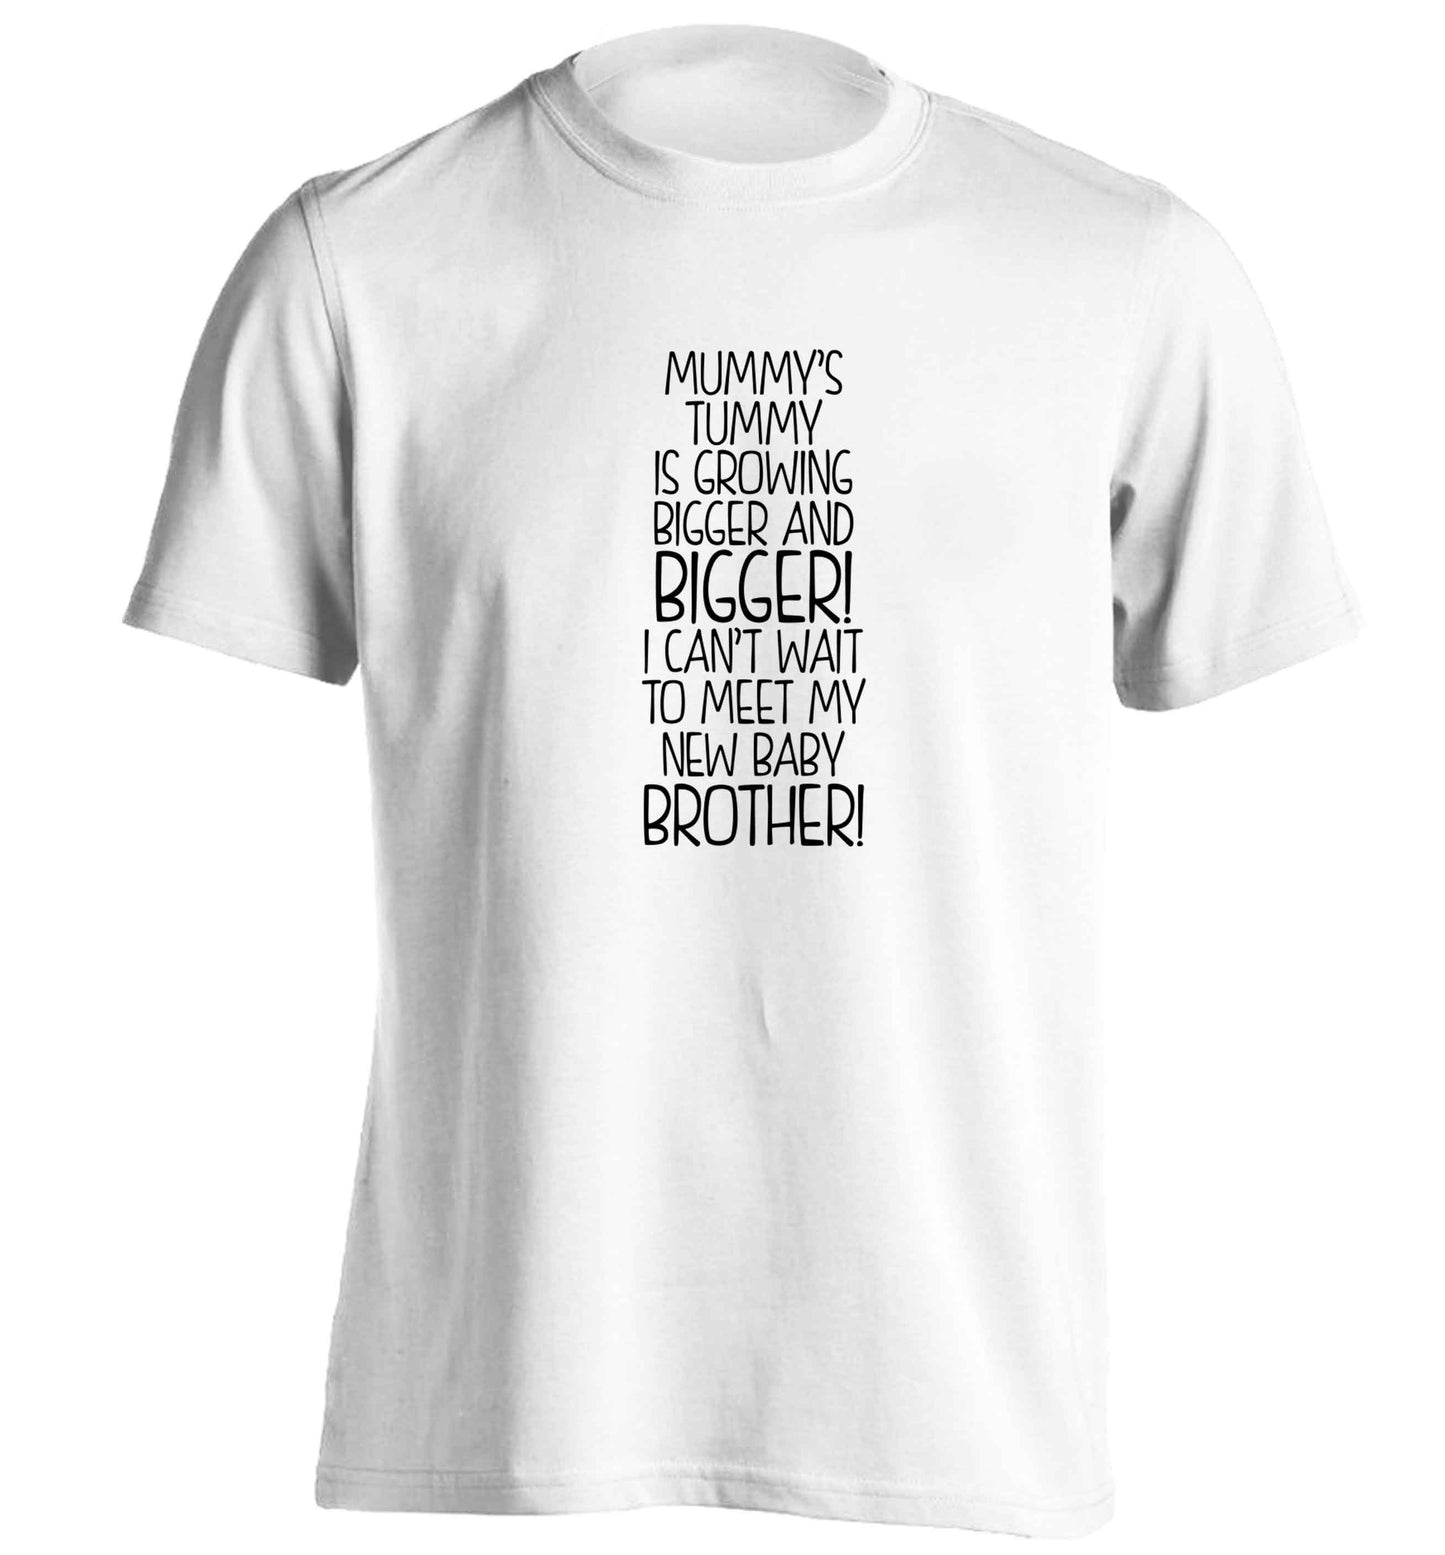 Mummy's tummy is growing bigger and bigger I can't wait to meet my new baby brother! adults unisex white Tshirt 2XL